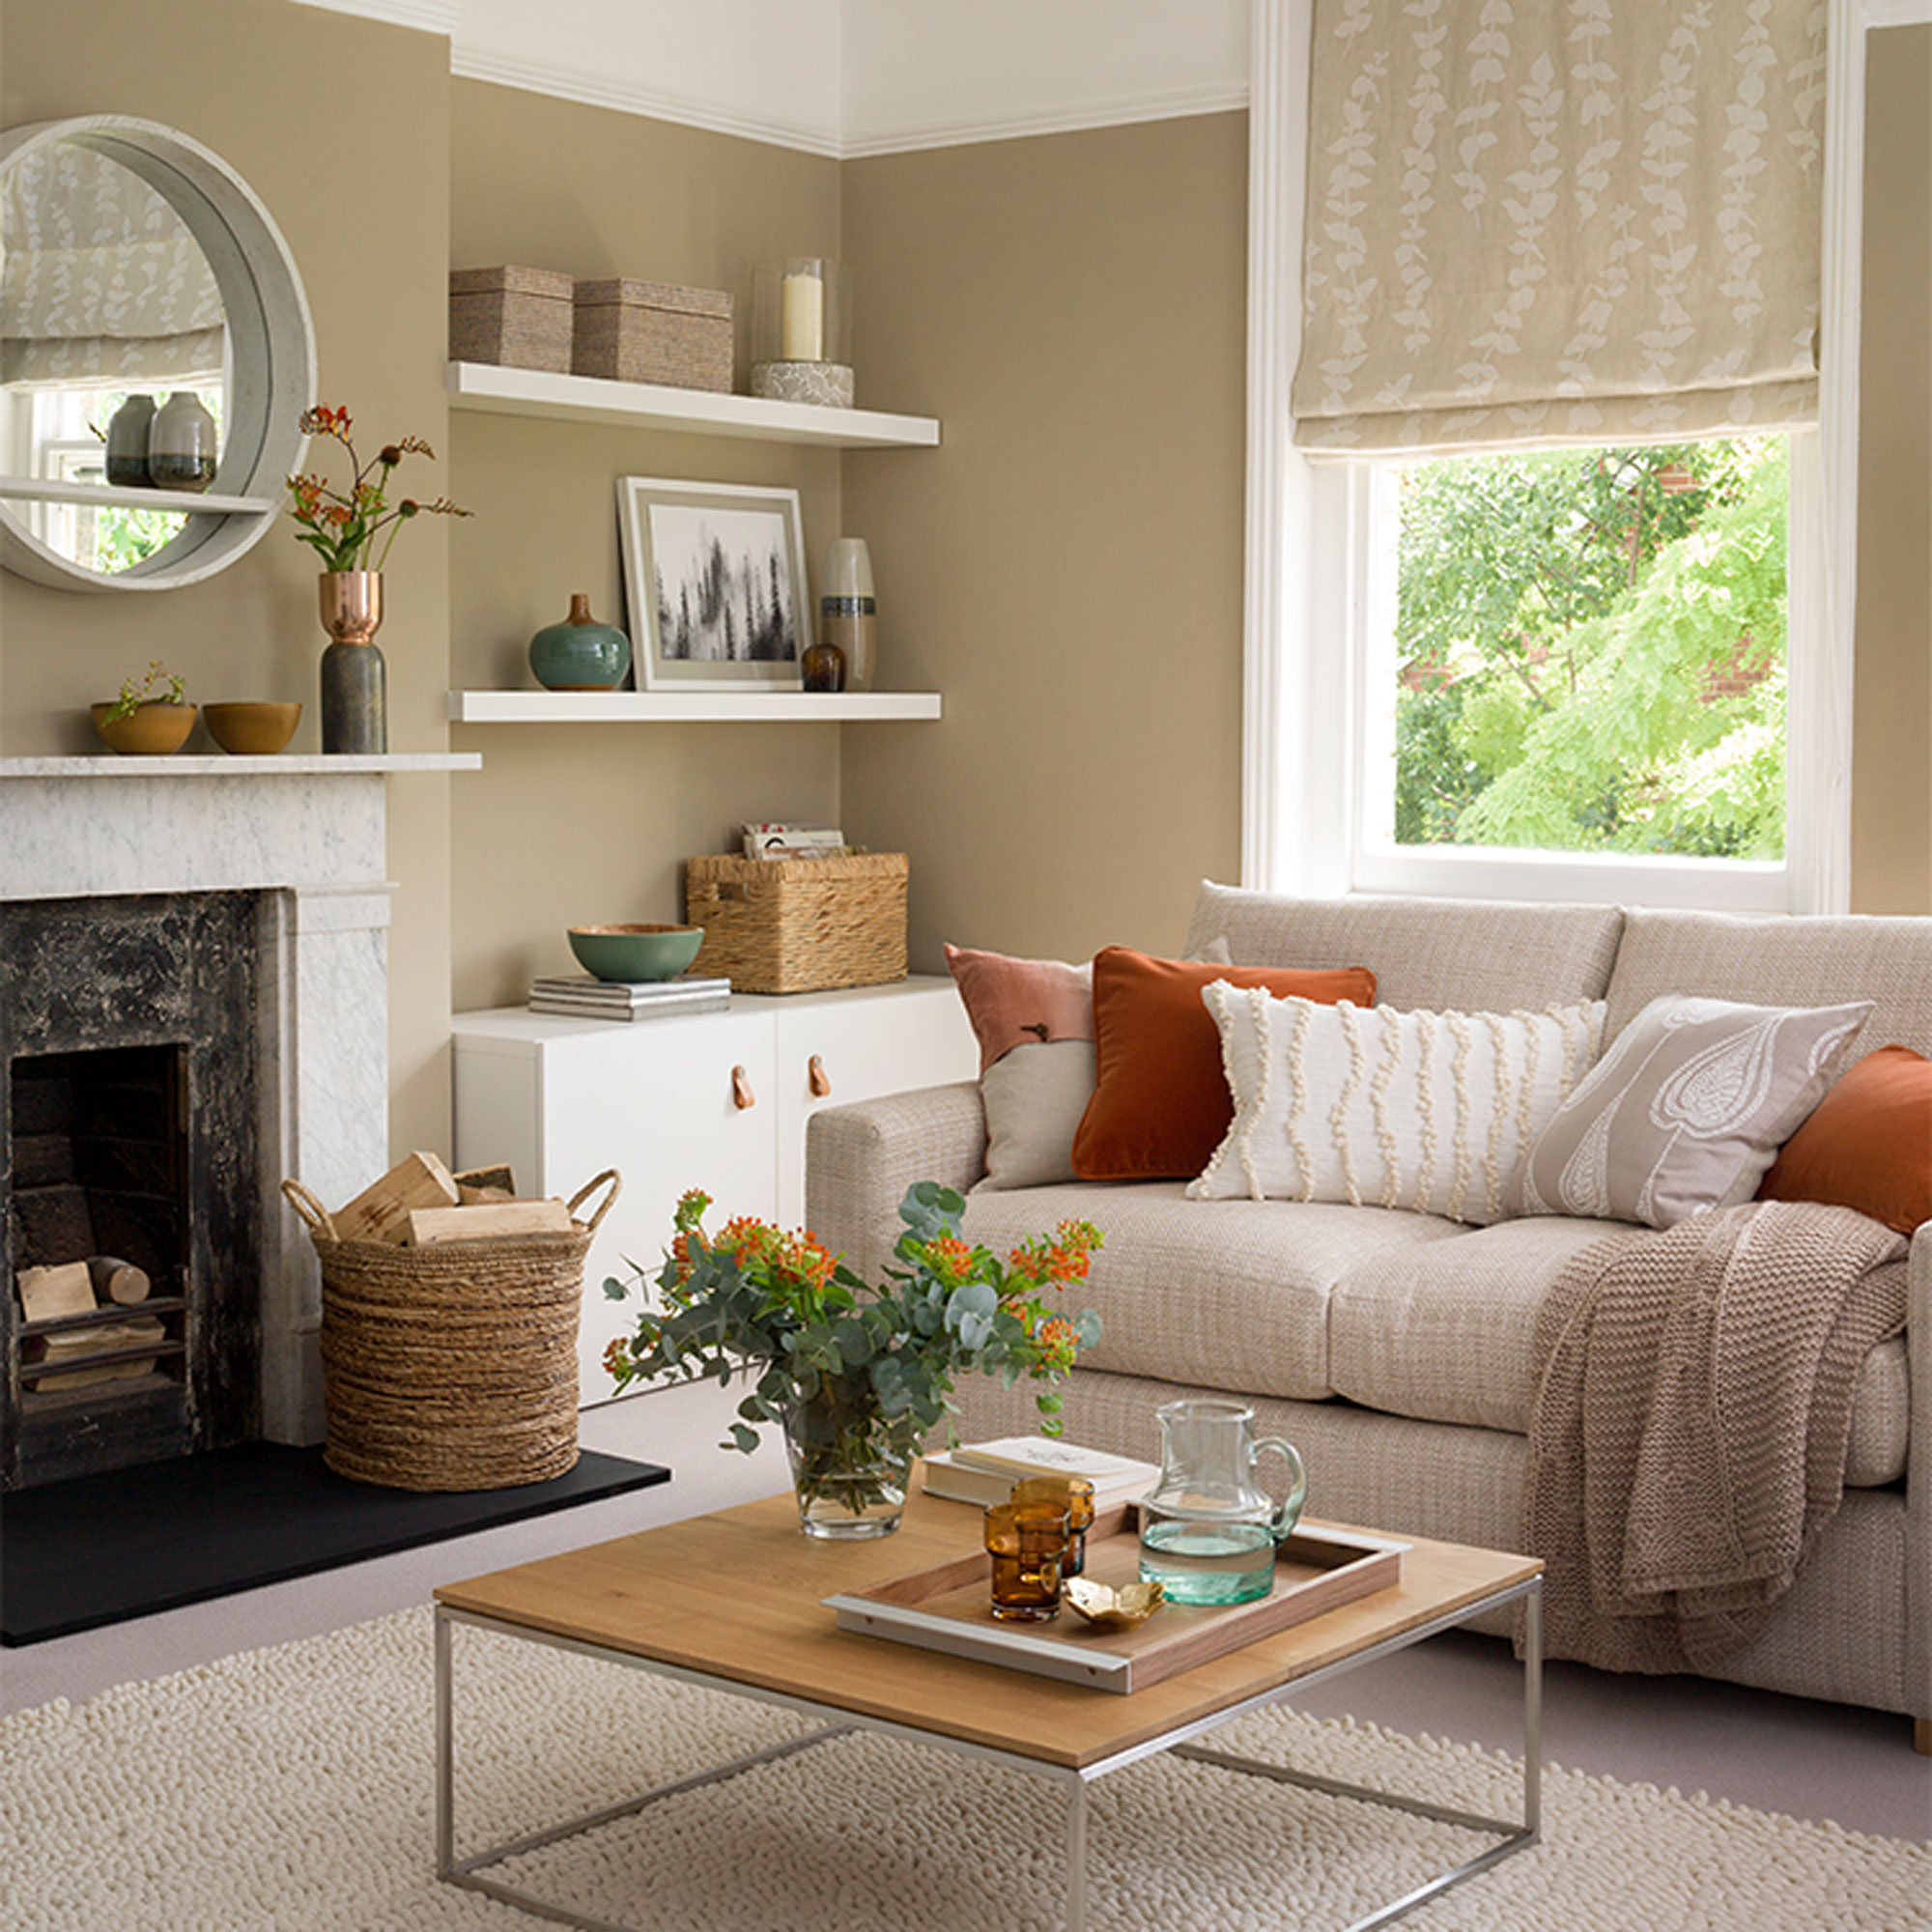 Beige Living Room Ideas - Stay Neutral With This Easygoing Colourway |  Ideal Home